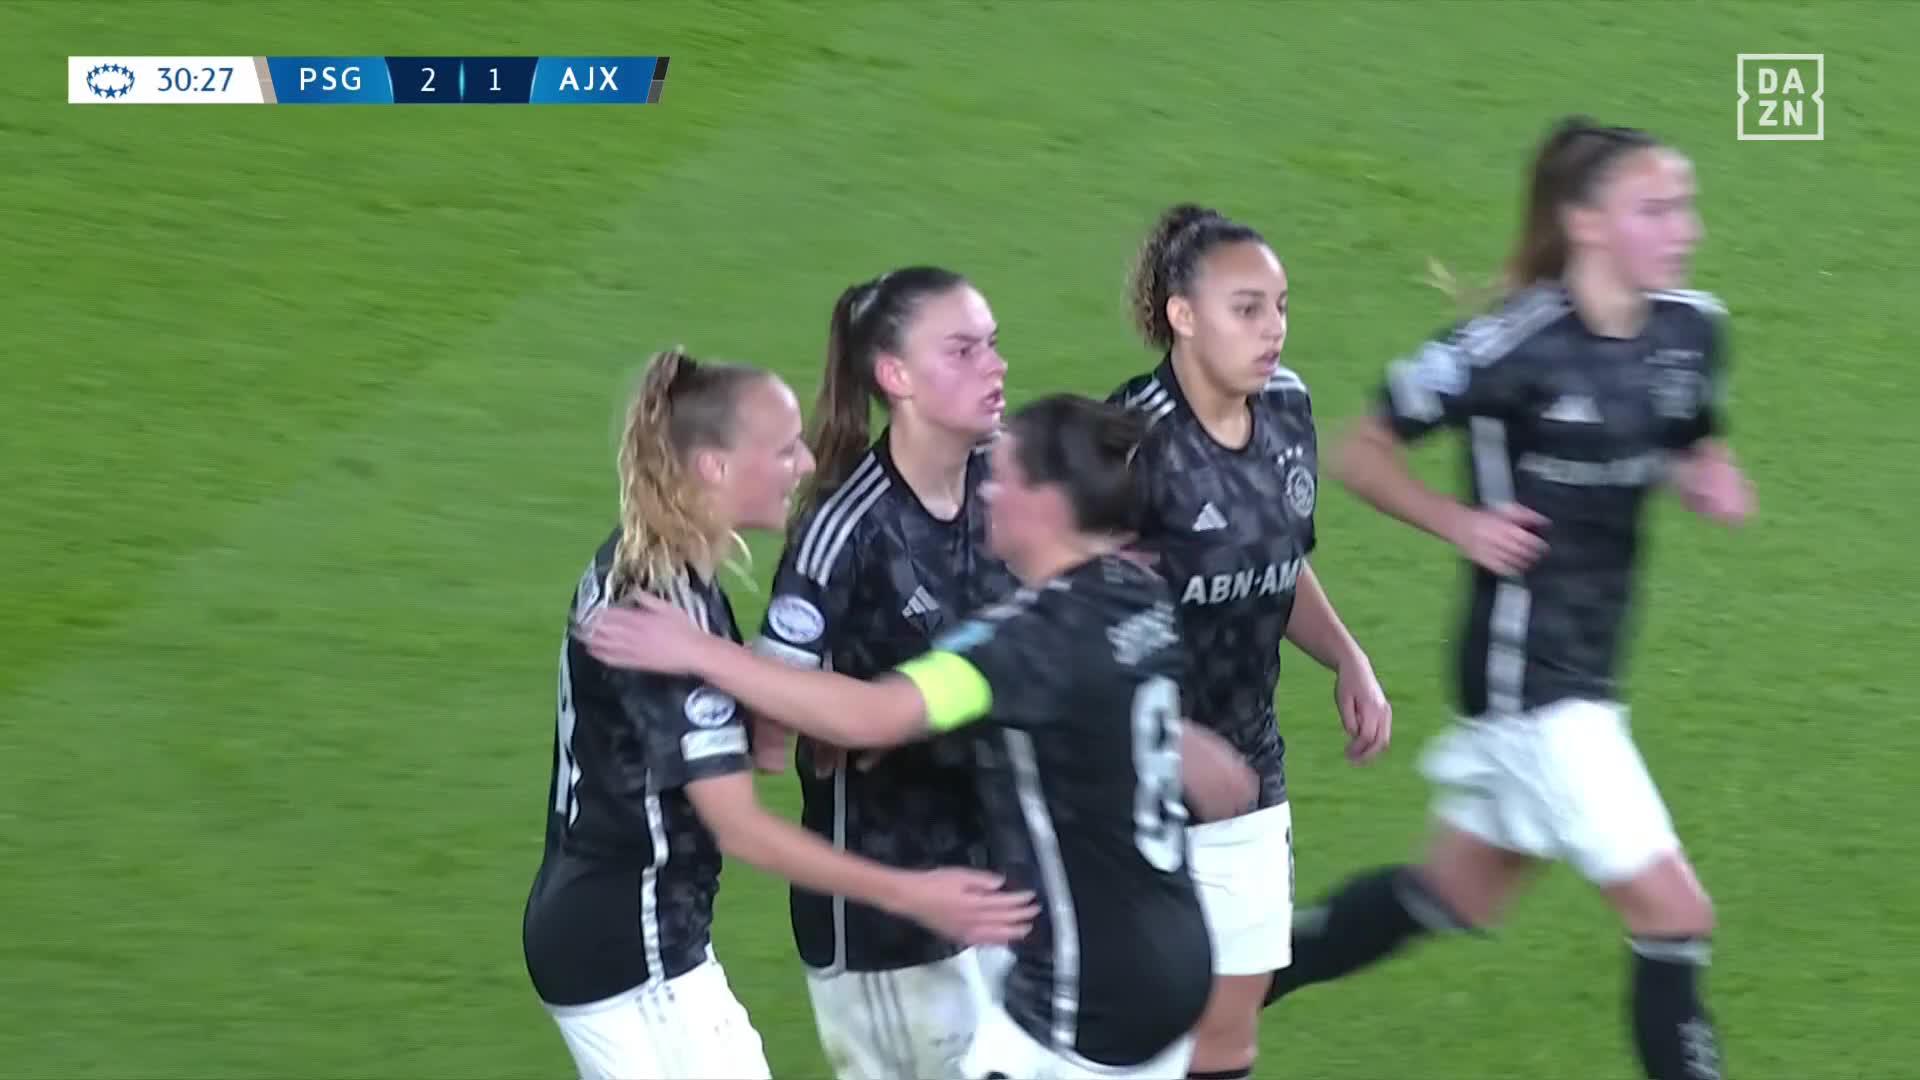 AJAX GET ONE BACK... Romée Leuchter with a clinical finish! 🌪Watch LIVE 📺  highlights on YouTube 👉  #NewDealforWomensFootball